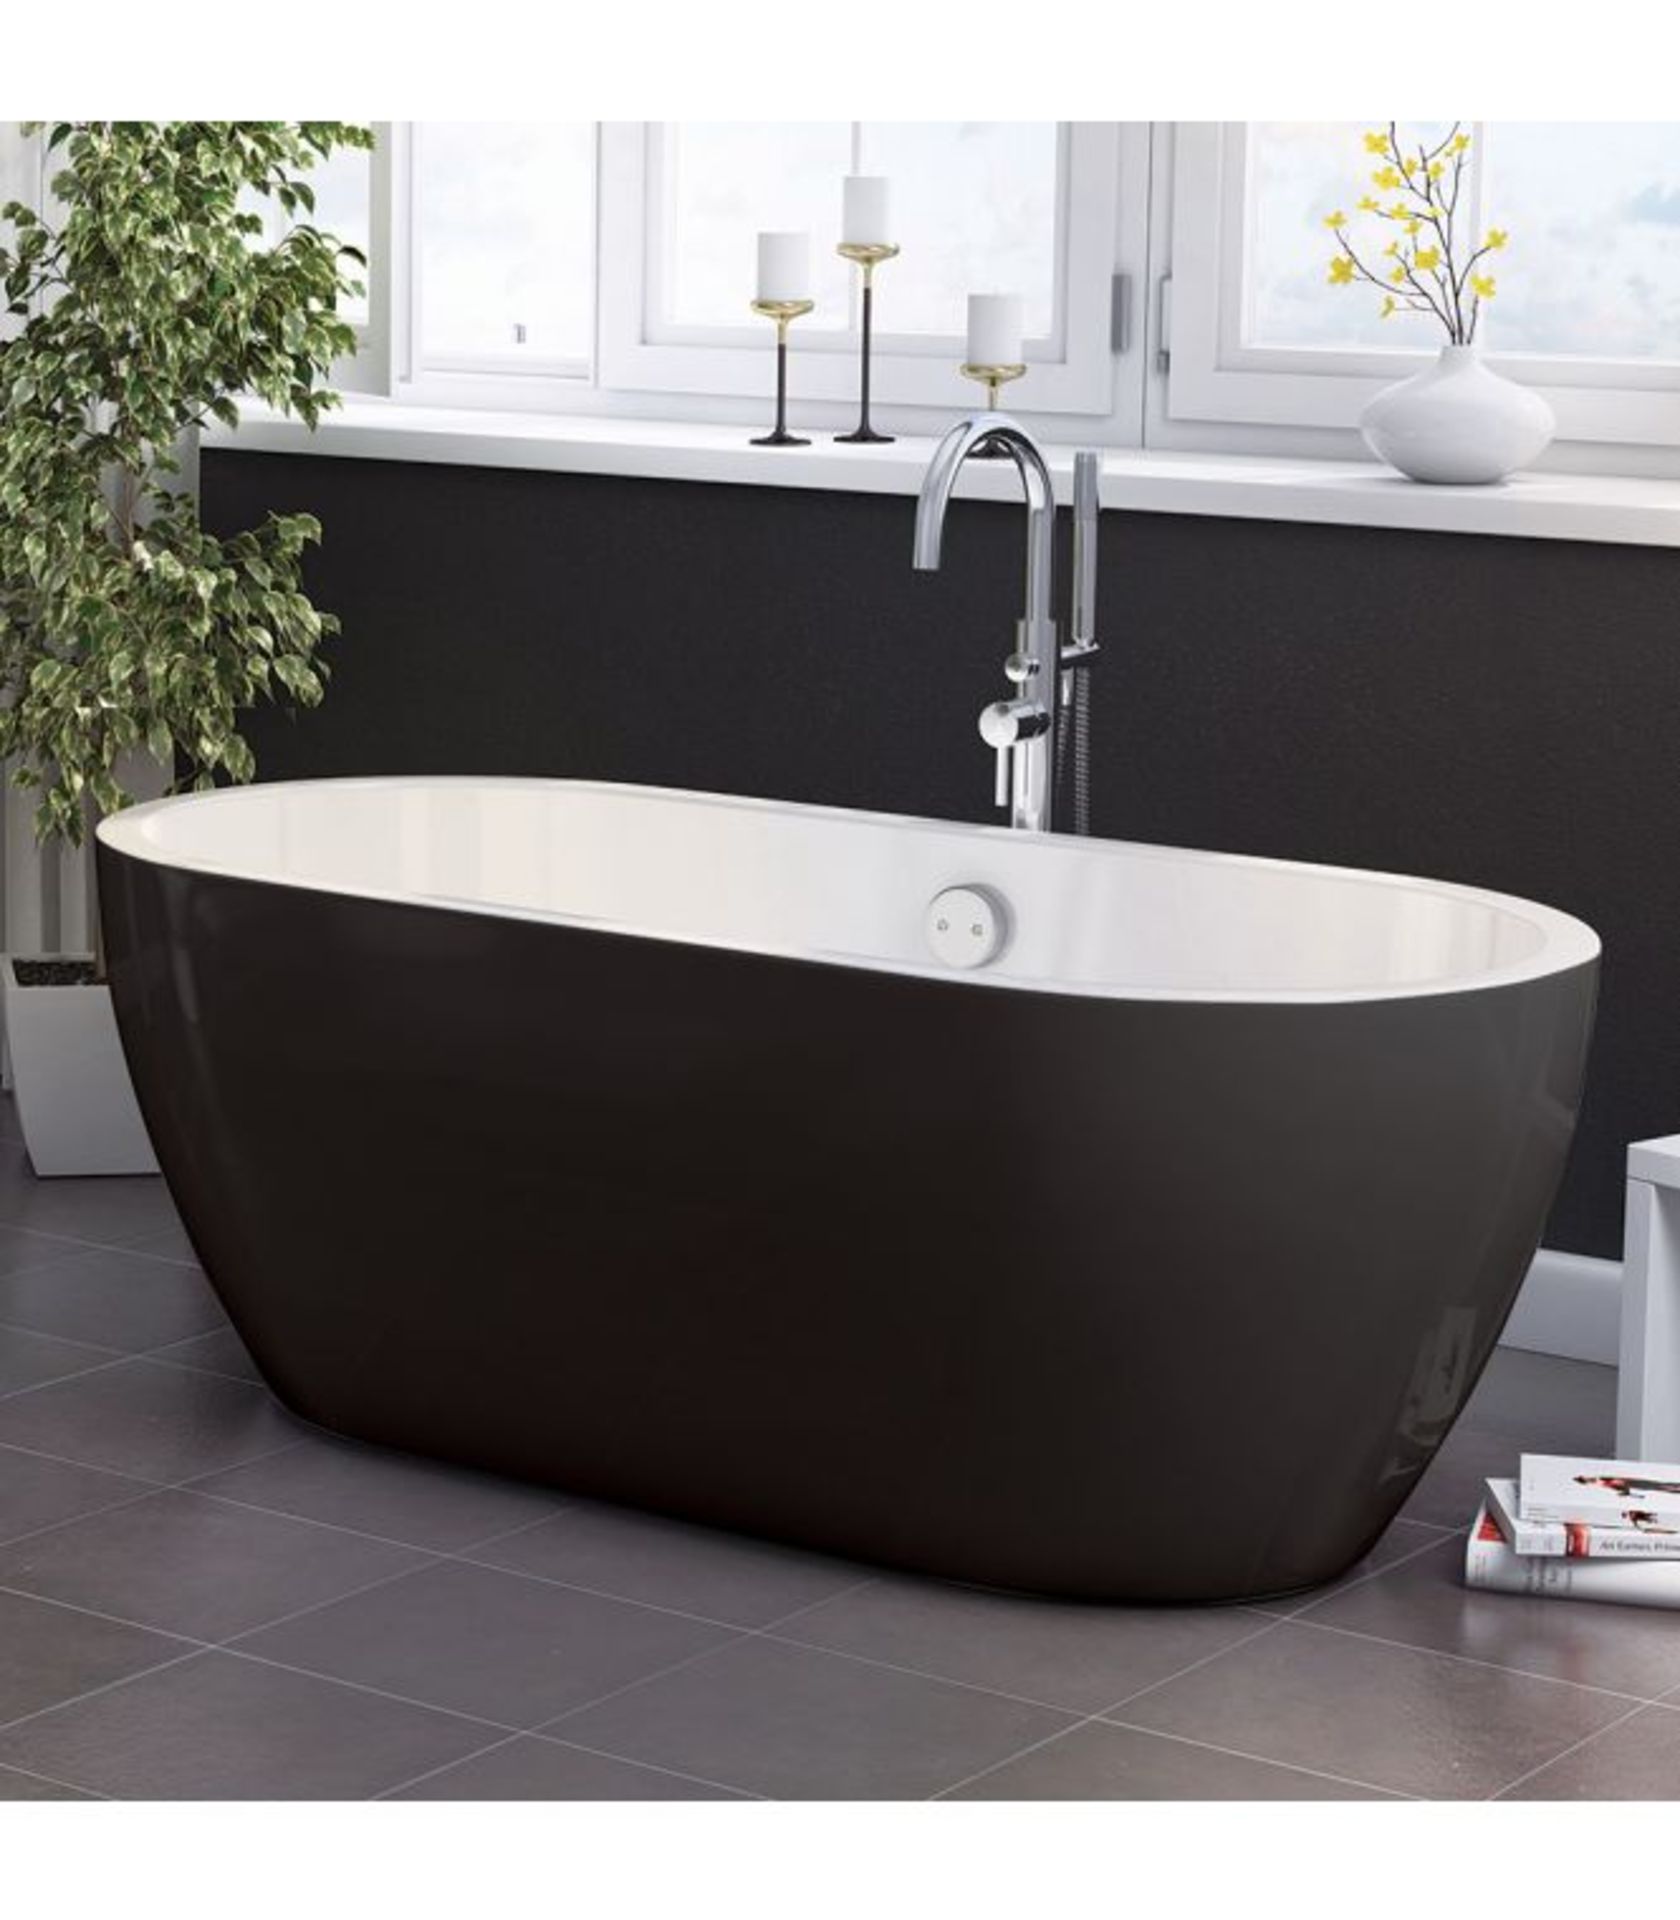 New (J2) 1655x740mm Round Double Ended Black Freestanding Bath. Rrp £2,337.Elegant, Contempor... - Image 2 of 5